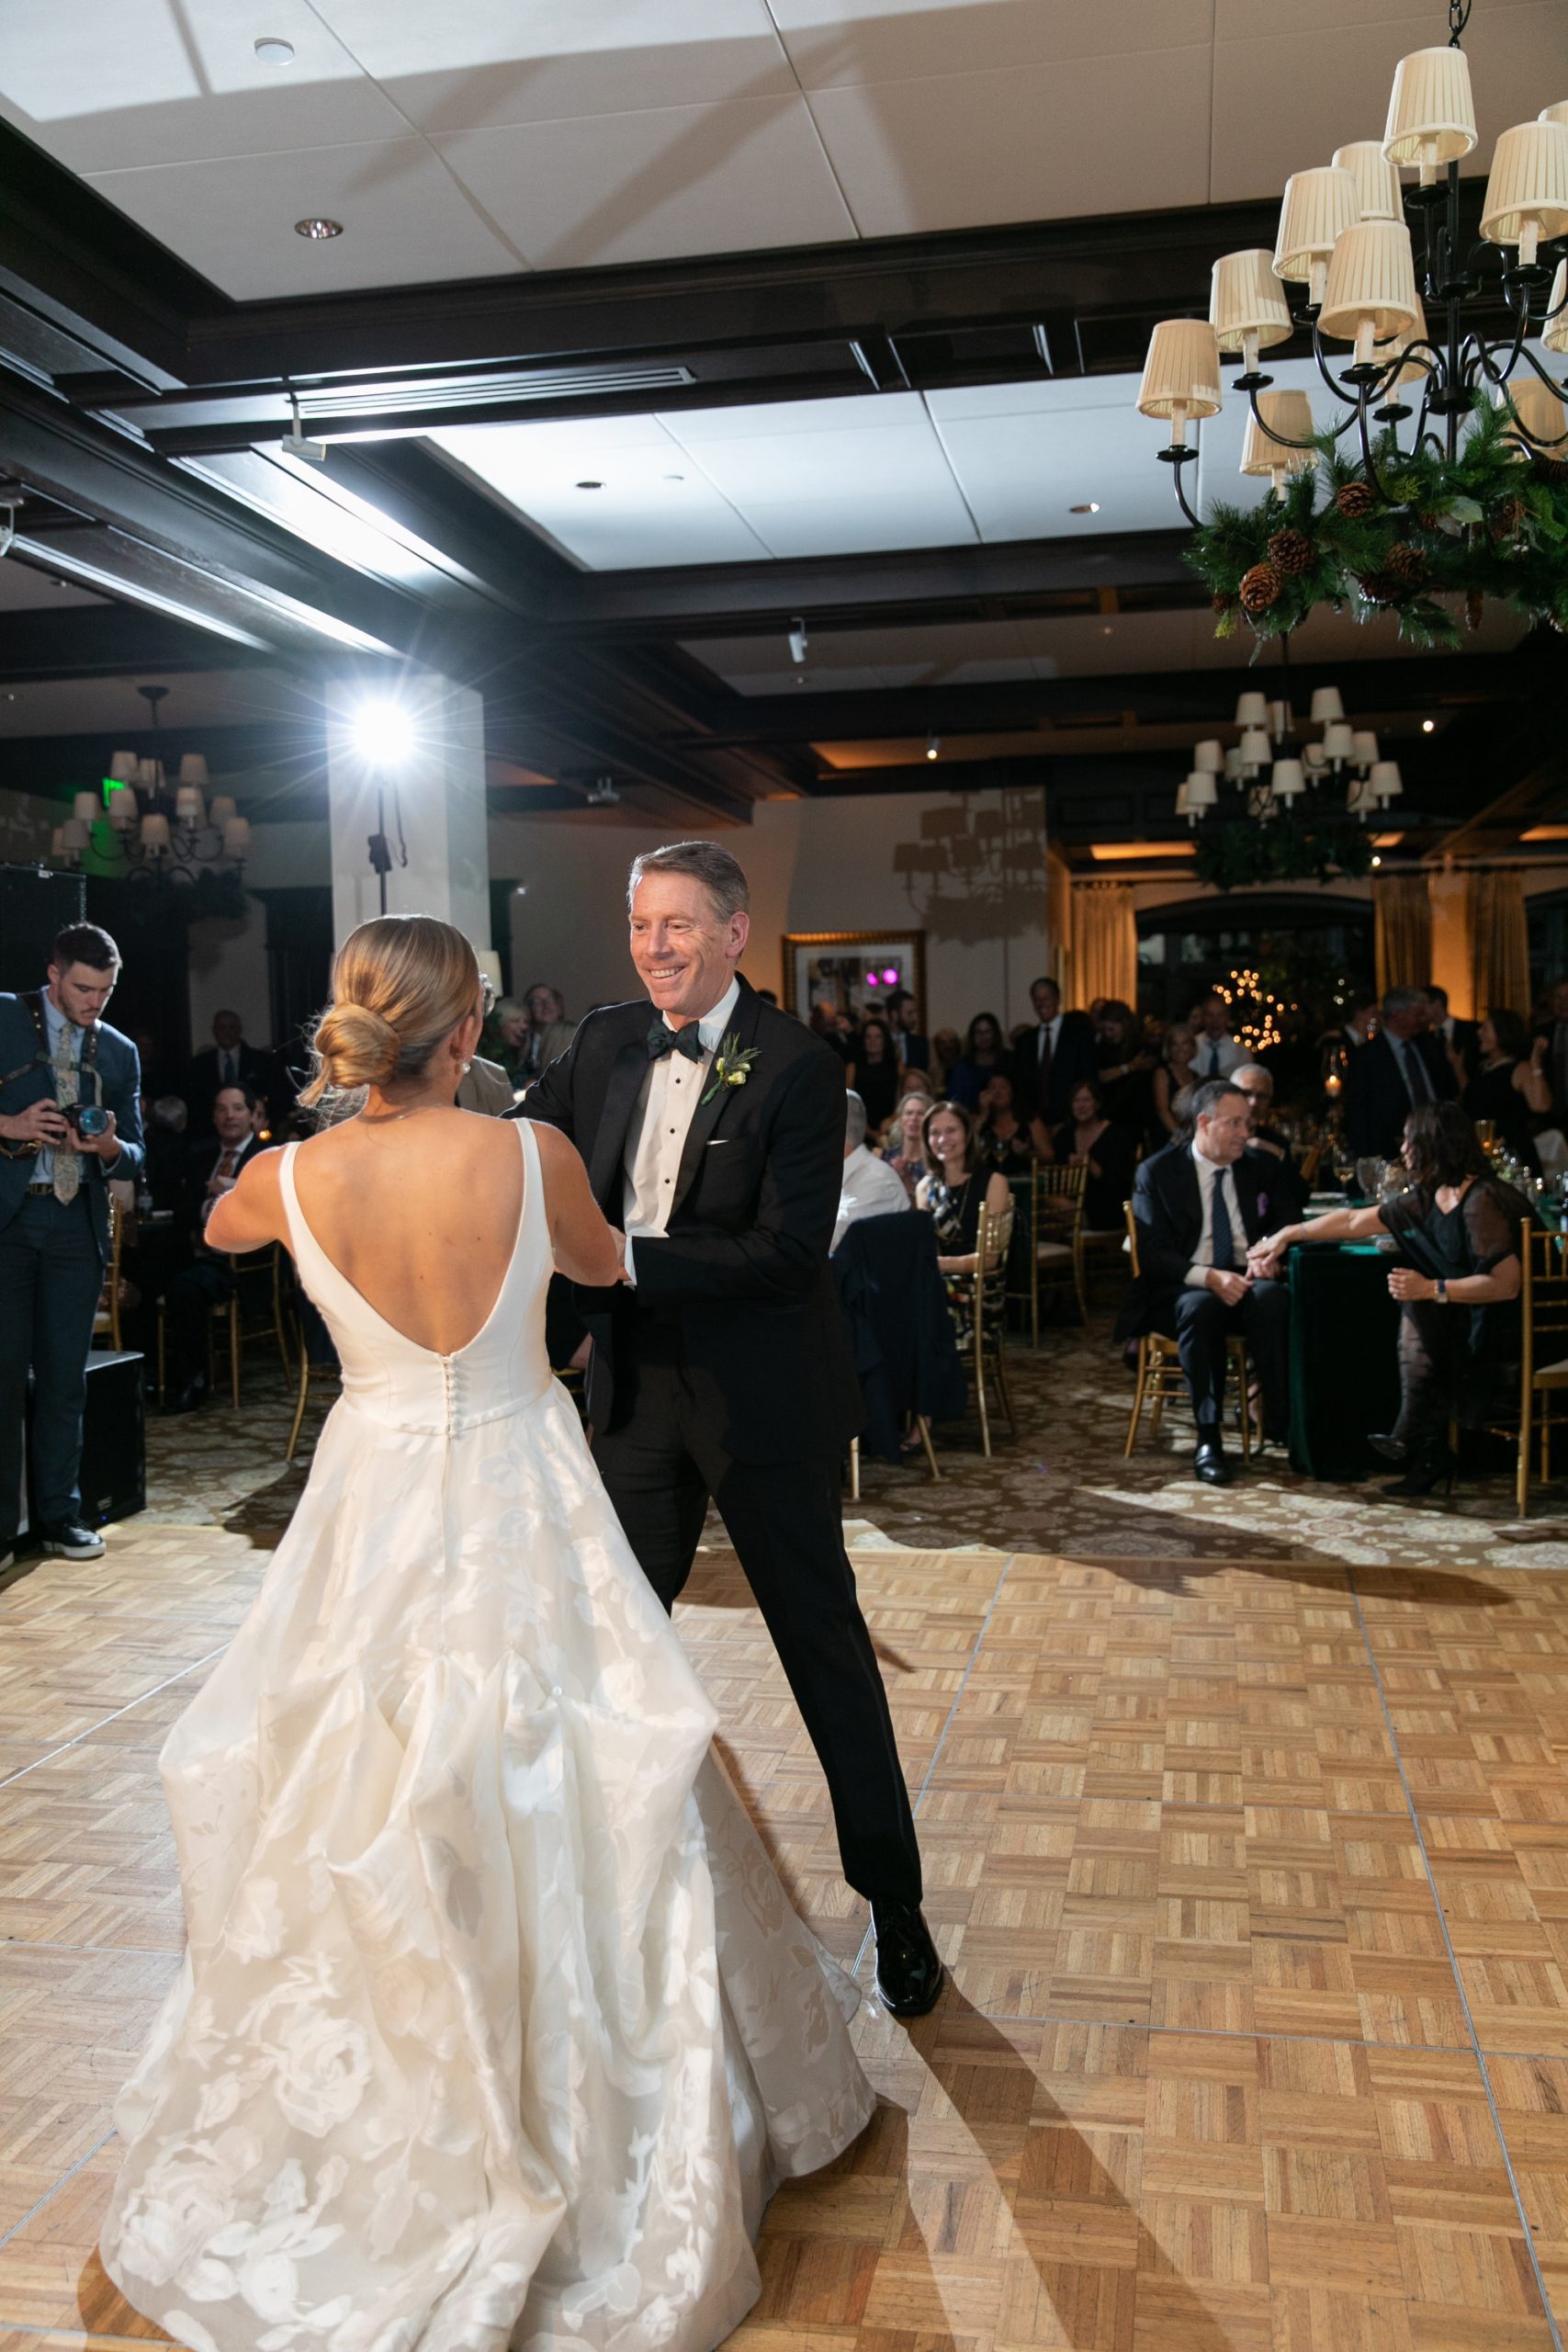 the bride shared a sweet first dance with her father.